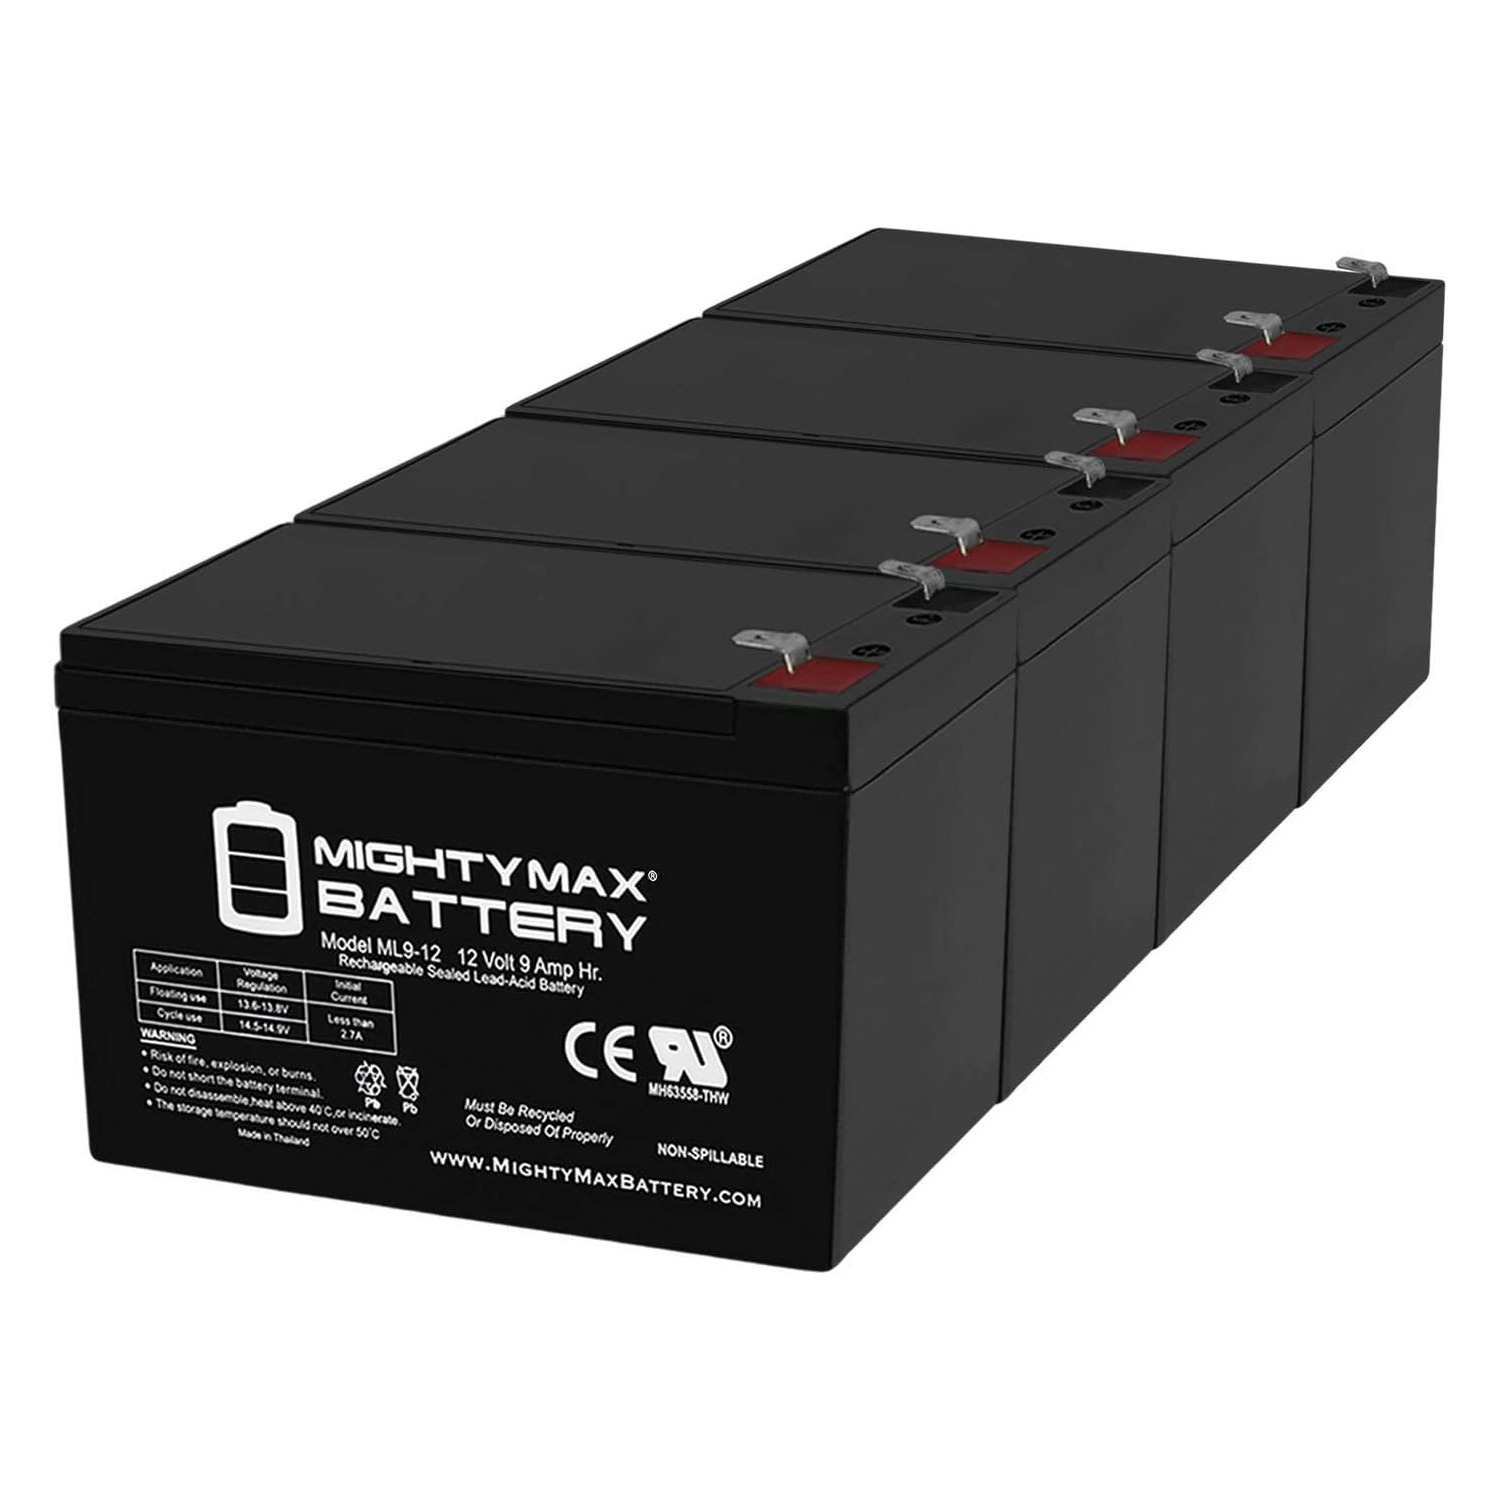 Altronix SMP3PMCTXPD4 12V, 9Ah Lead Acid Battery - 4 Pack